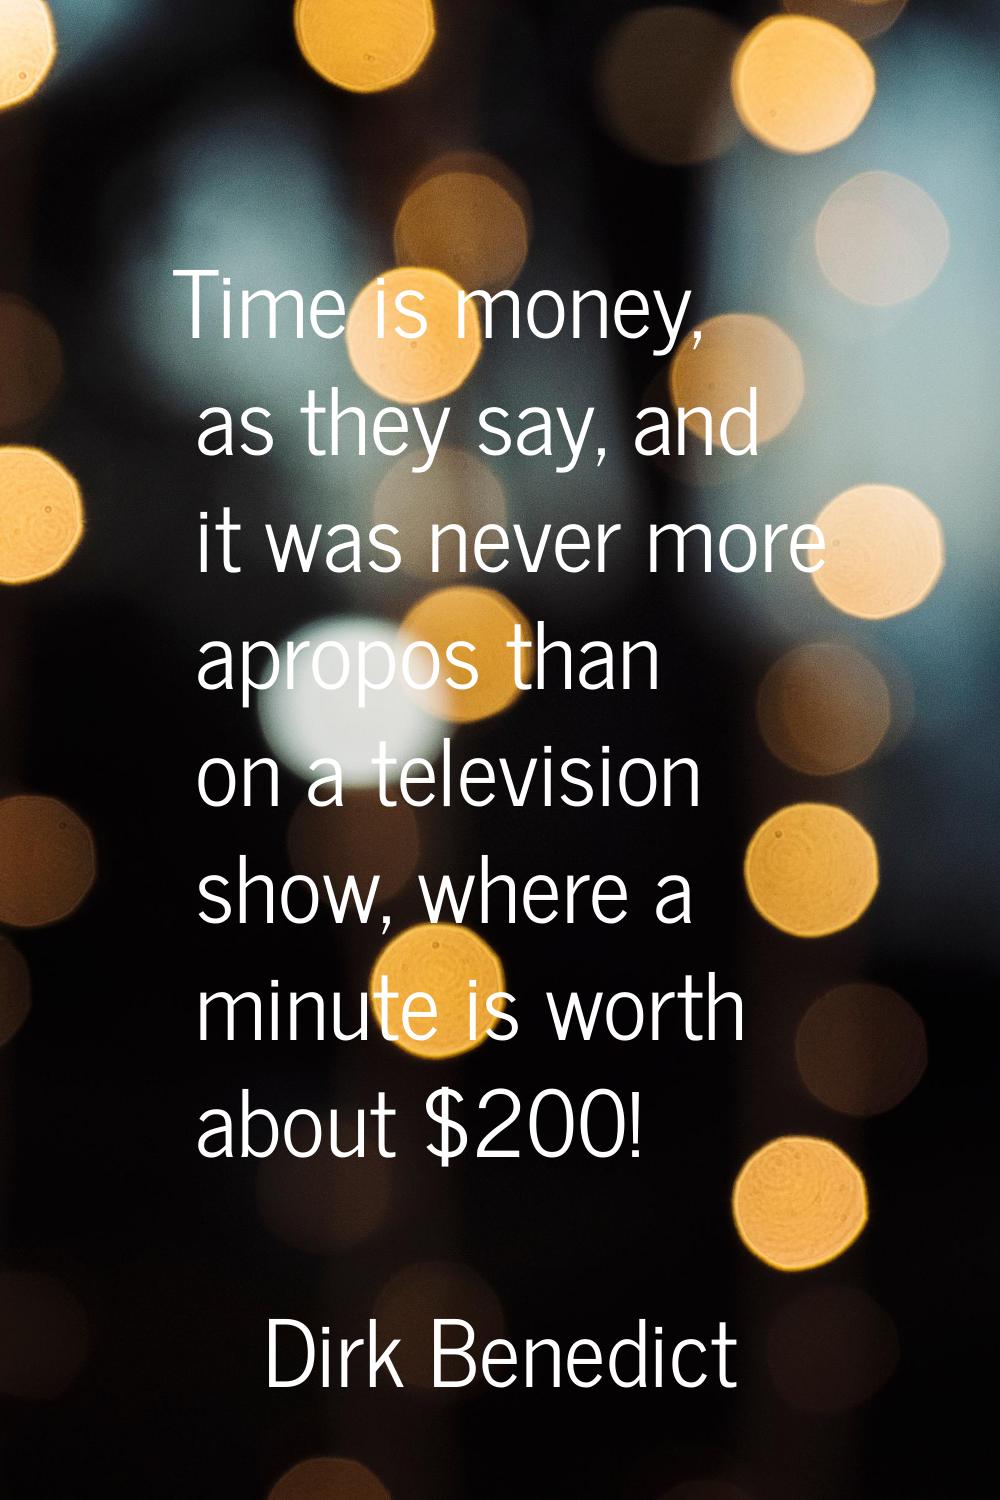 Time is money, as they say, and it was never more apropos than on a television show, where a minute